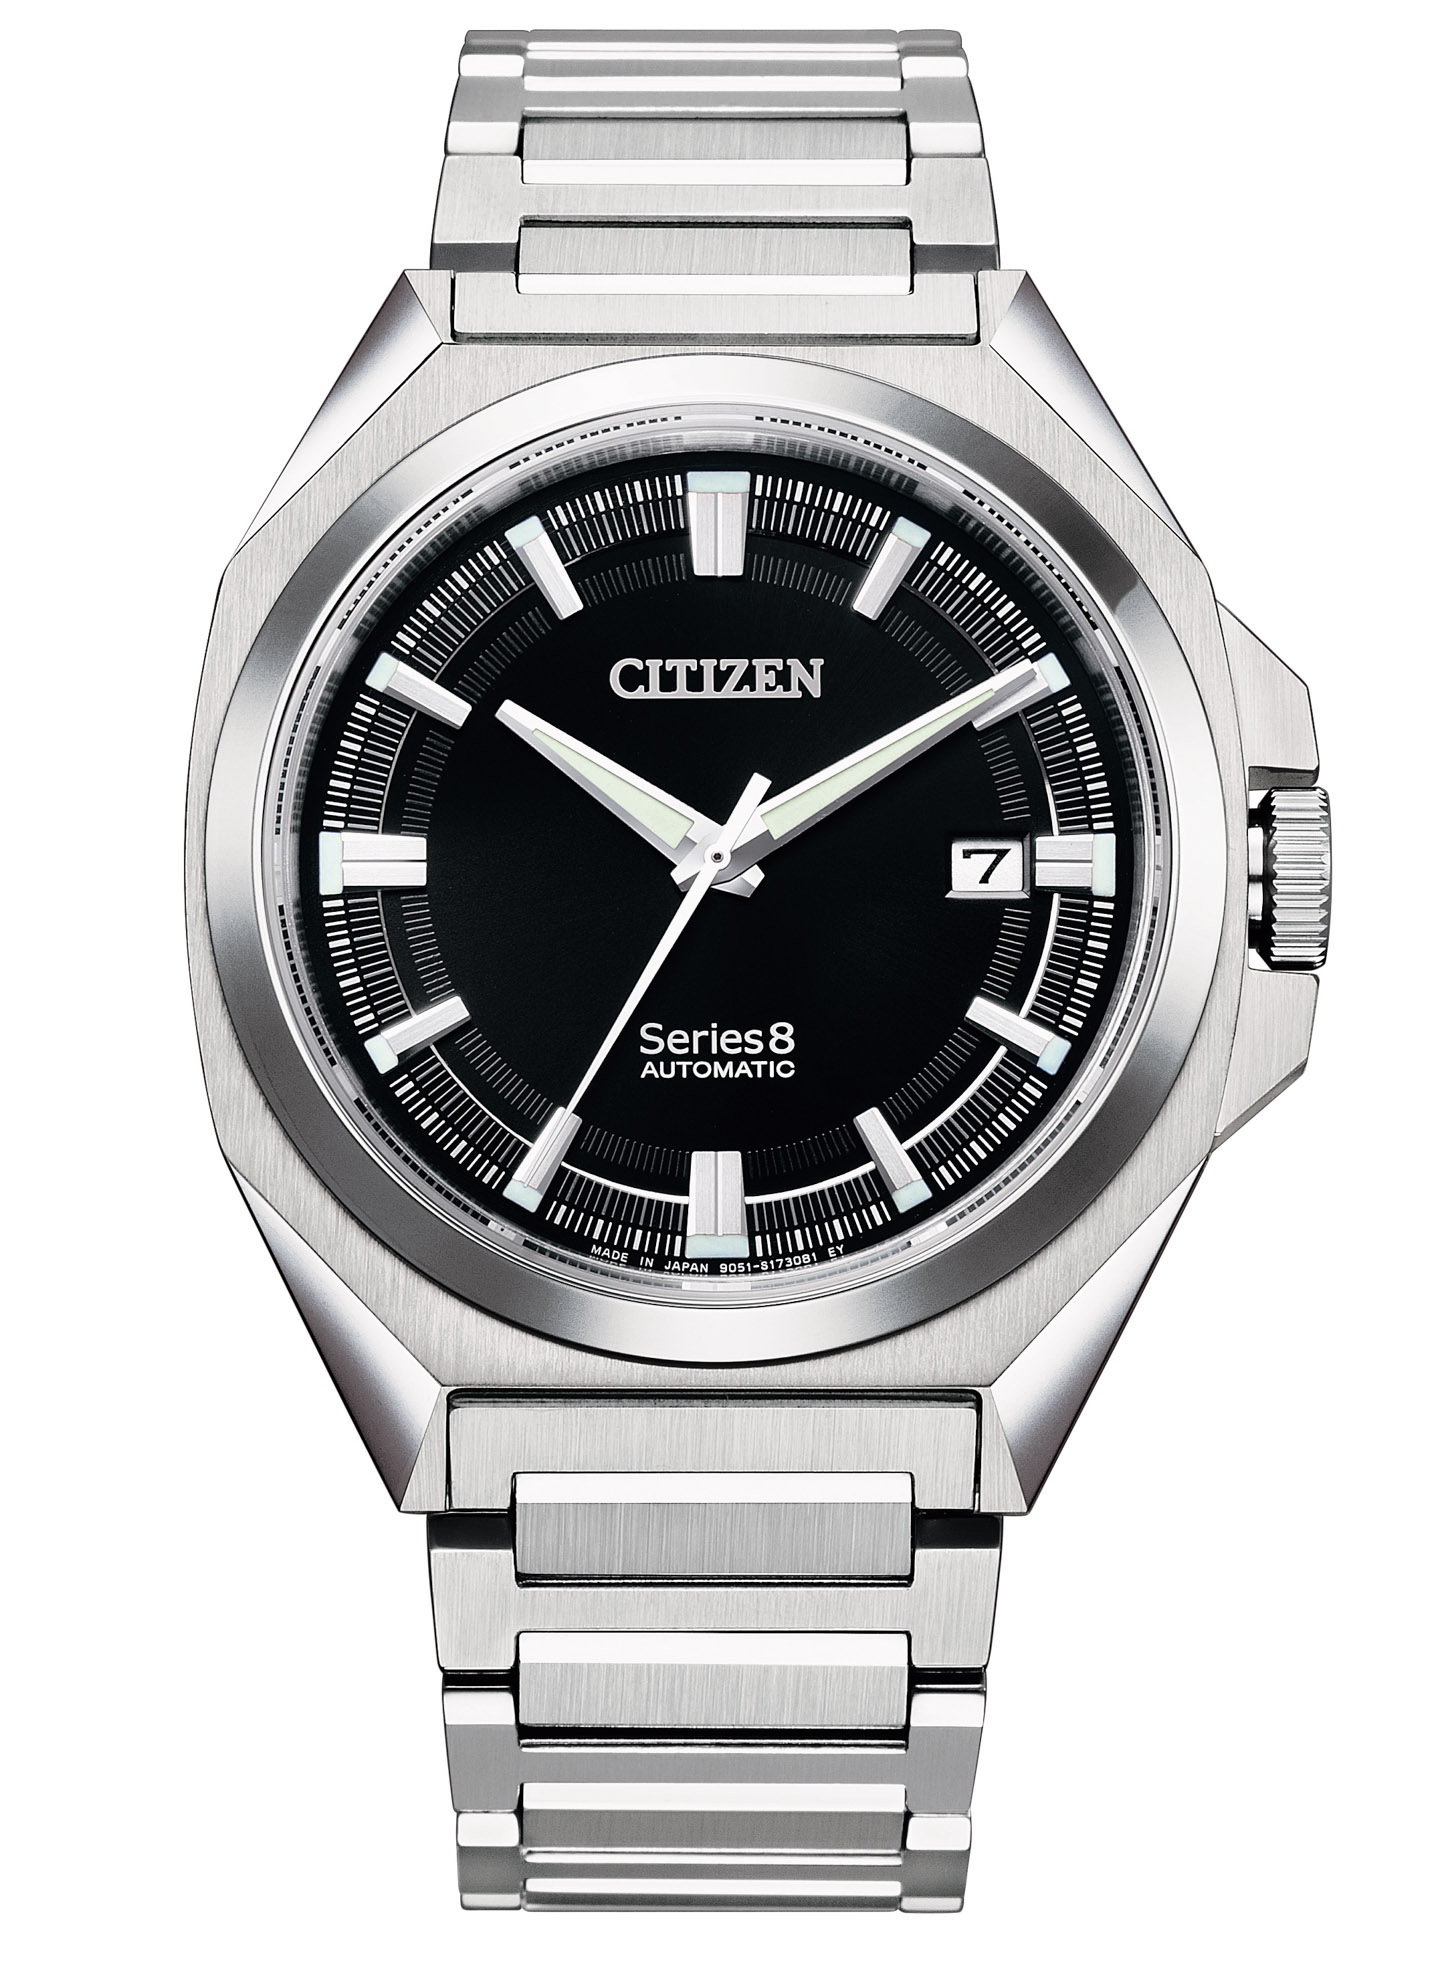 Citizen Series 8 Automatic watches 6